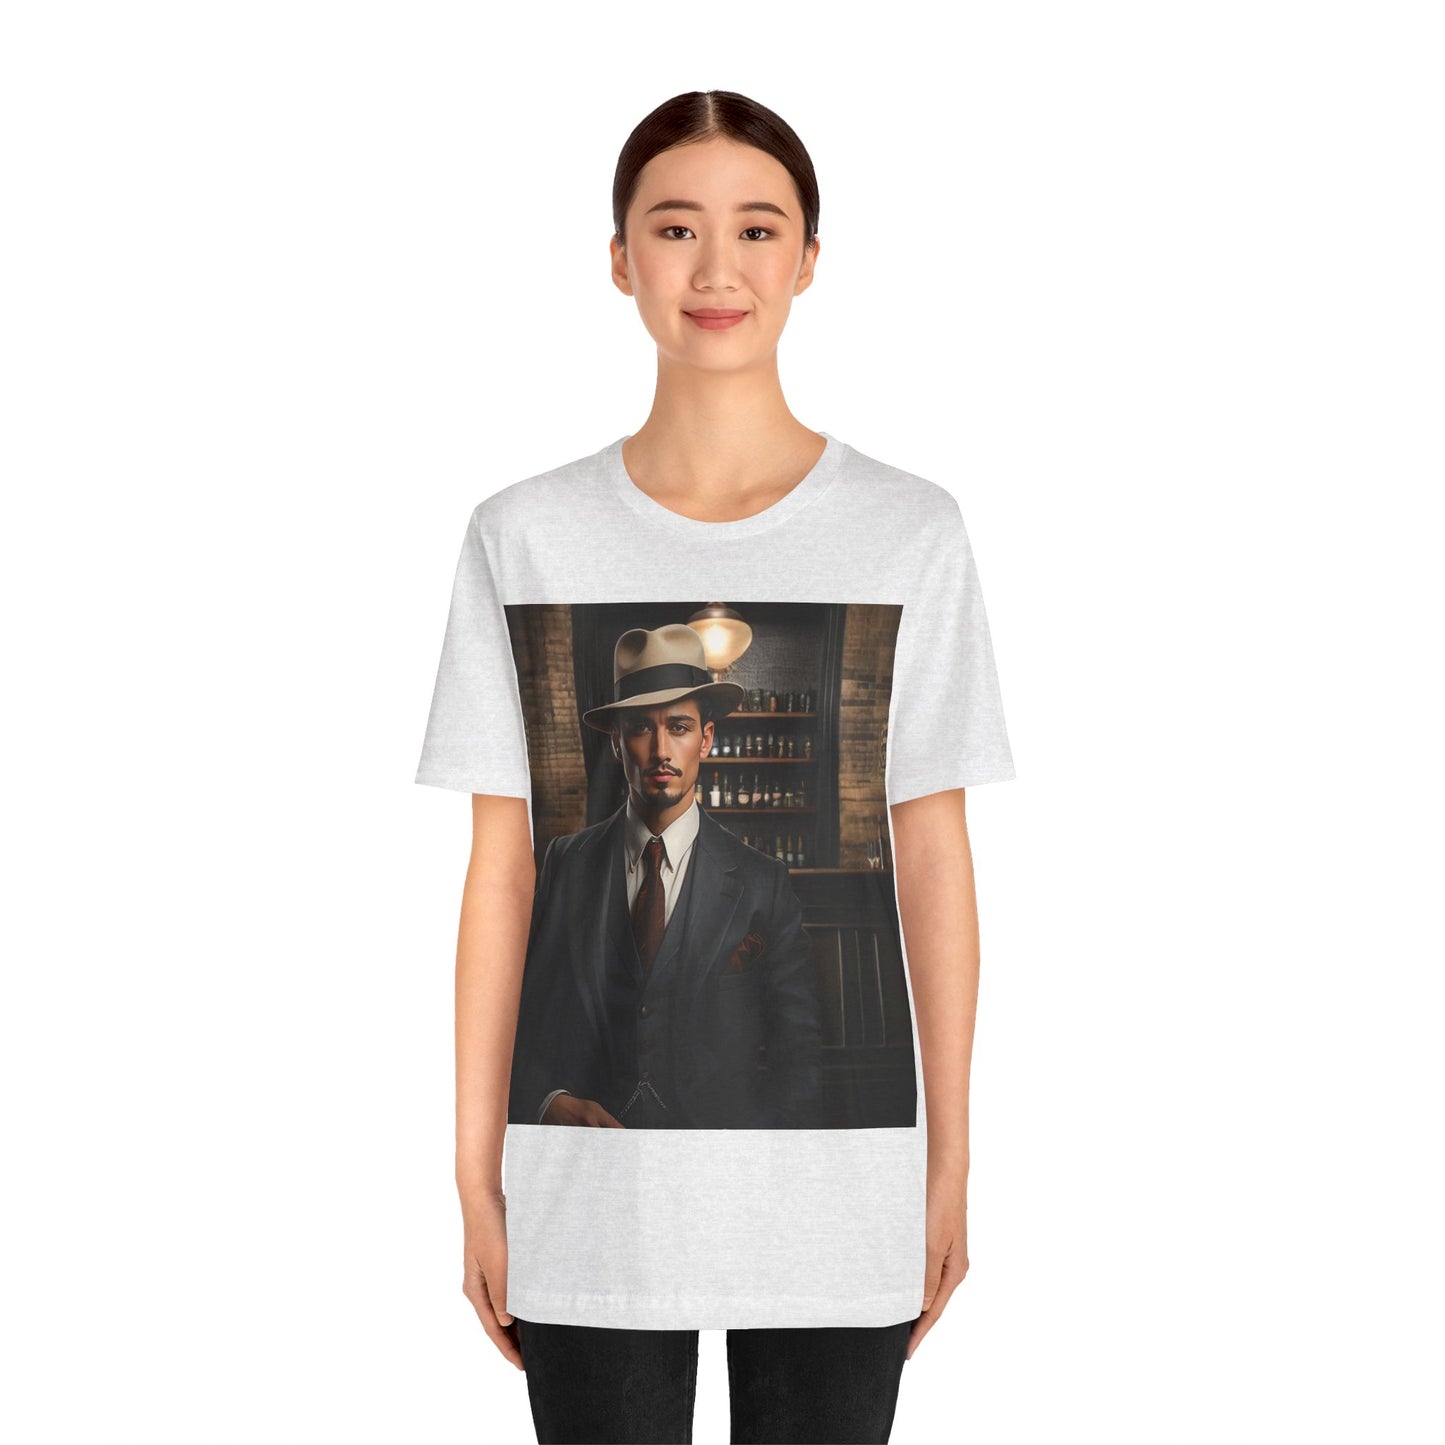 Gangster Is As Gangster Does | HD Graphic | Prohibition | Speakeasy | Unisex | Men's | Women's | Tee | T-Shirt